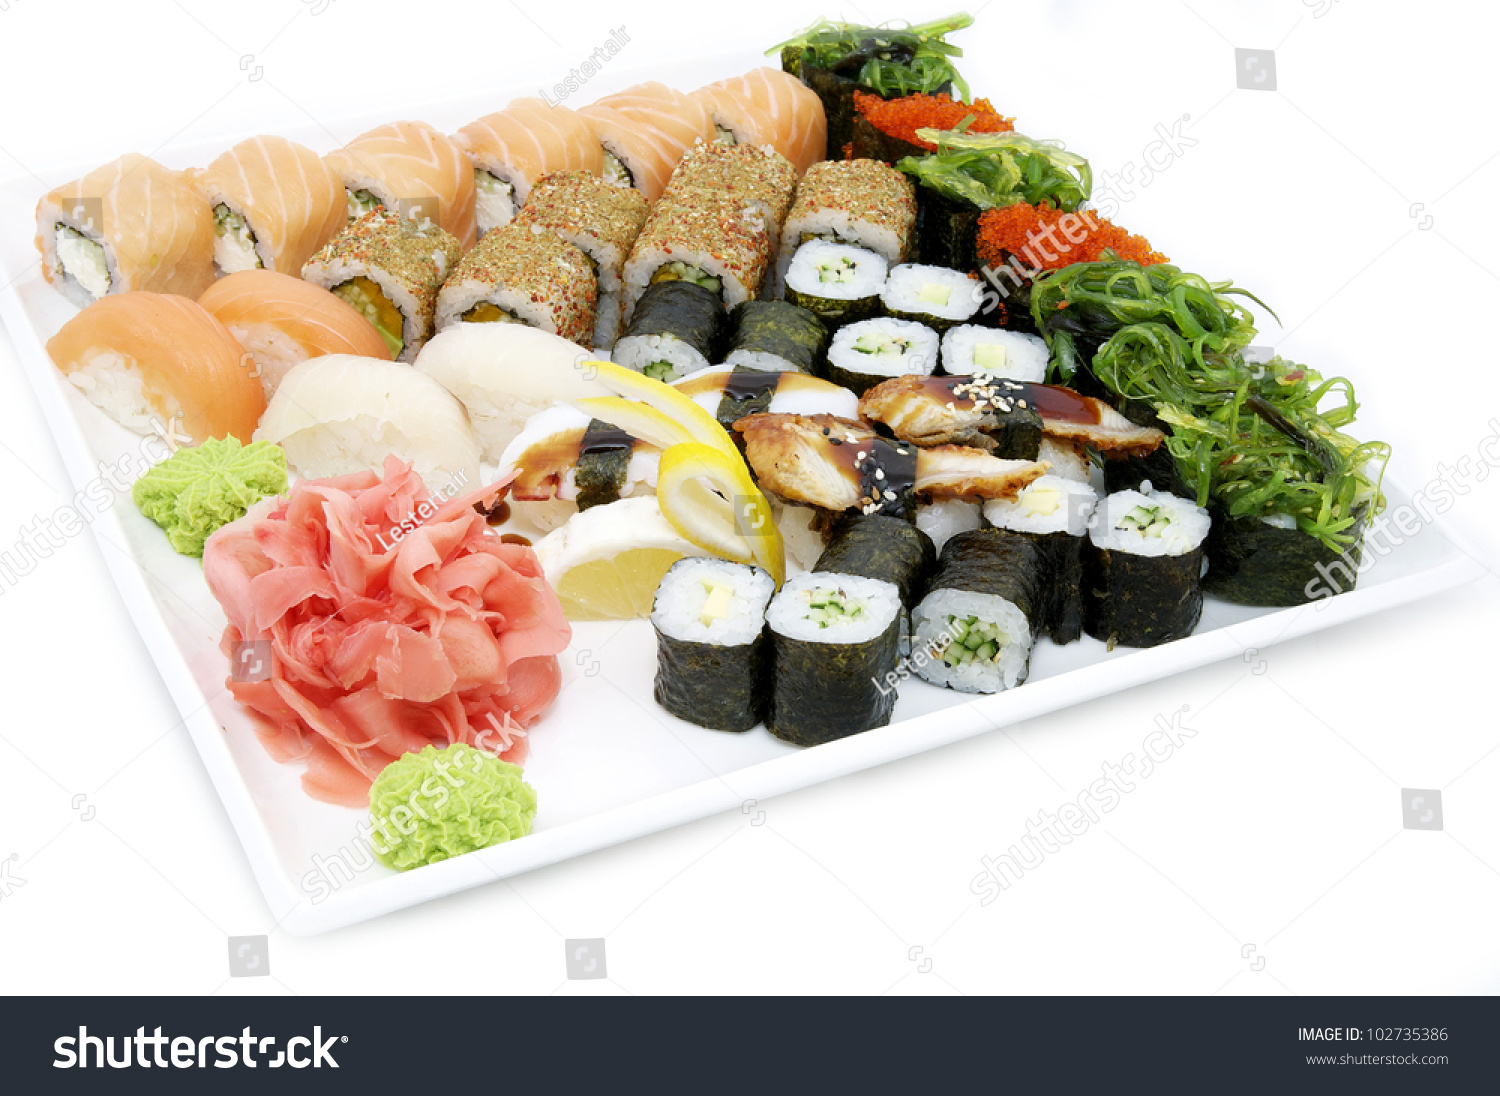 Delicious Seafood Sushi At A Japanese Restaurant Stock Photo 102735386